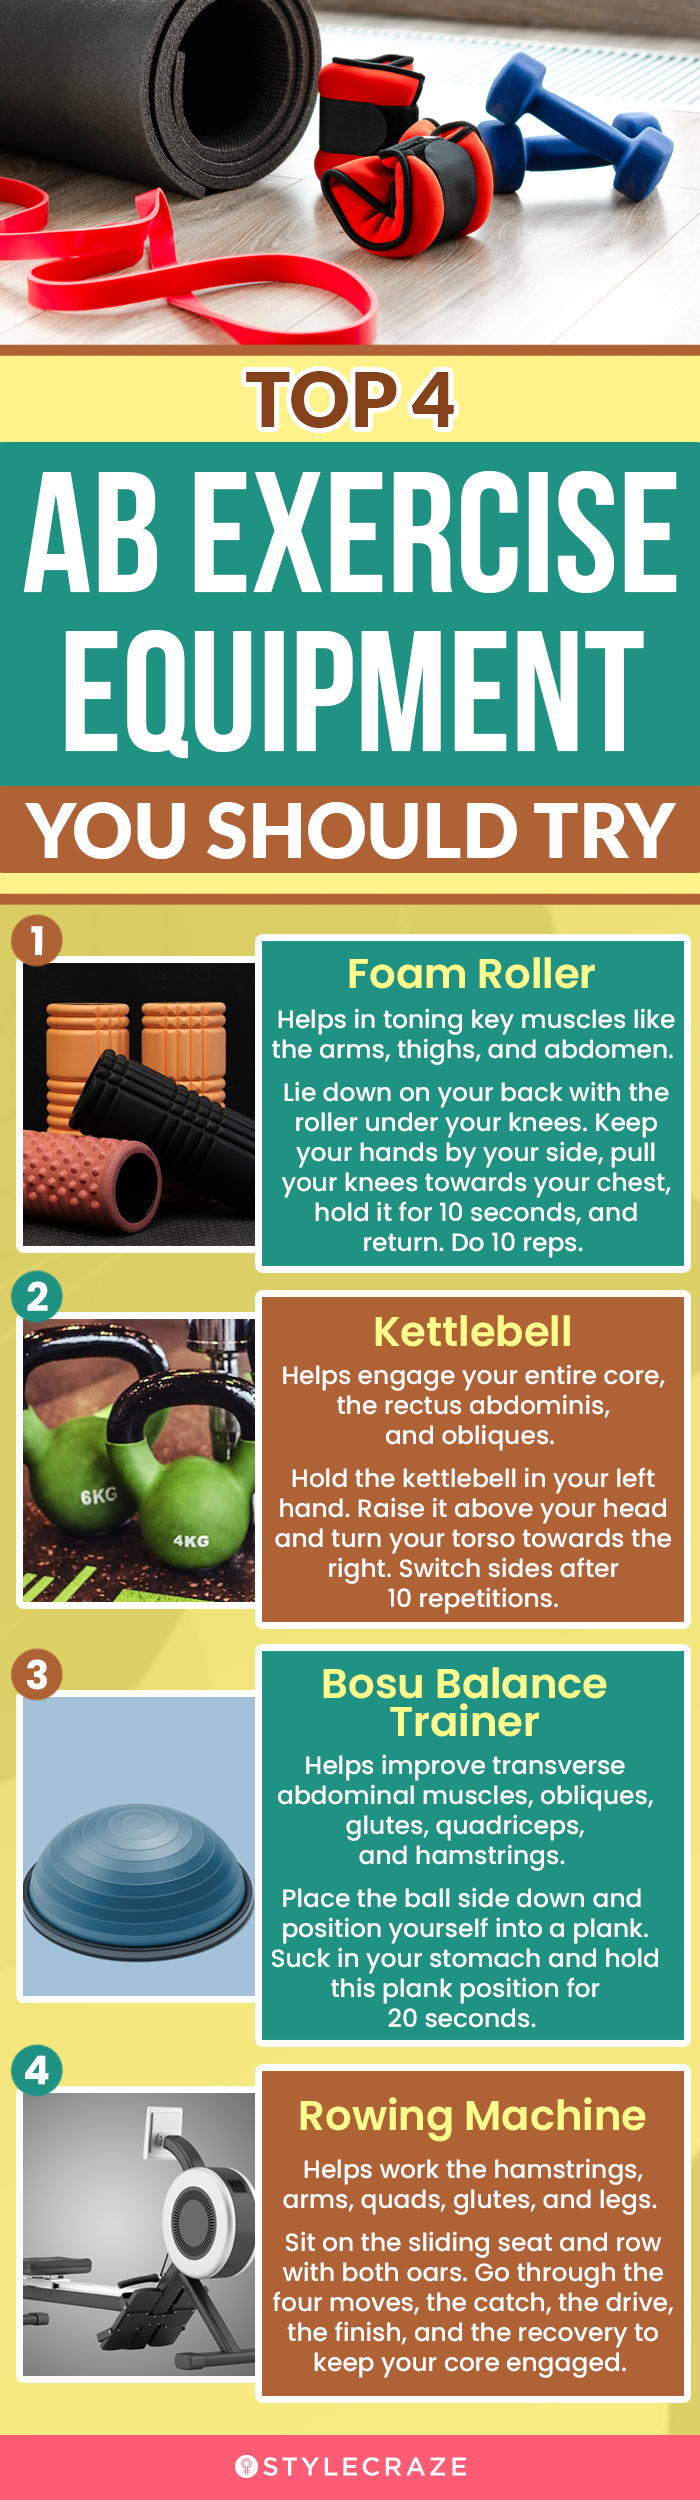 top 4 ab exercise equipments you should try (infographic)